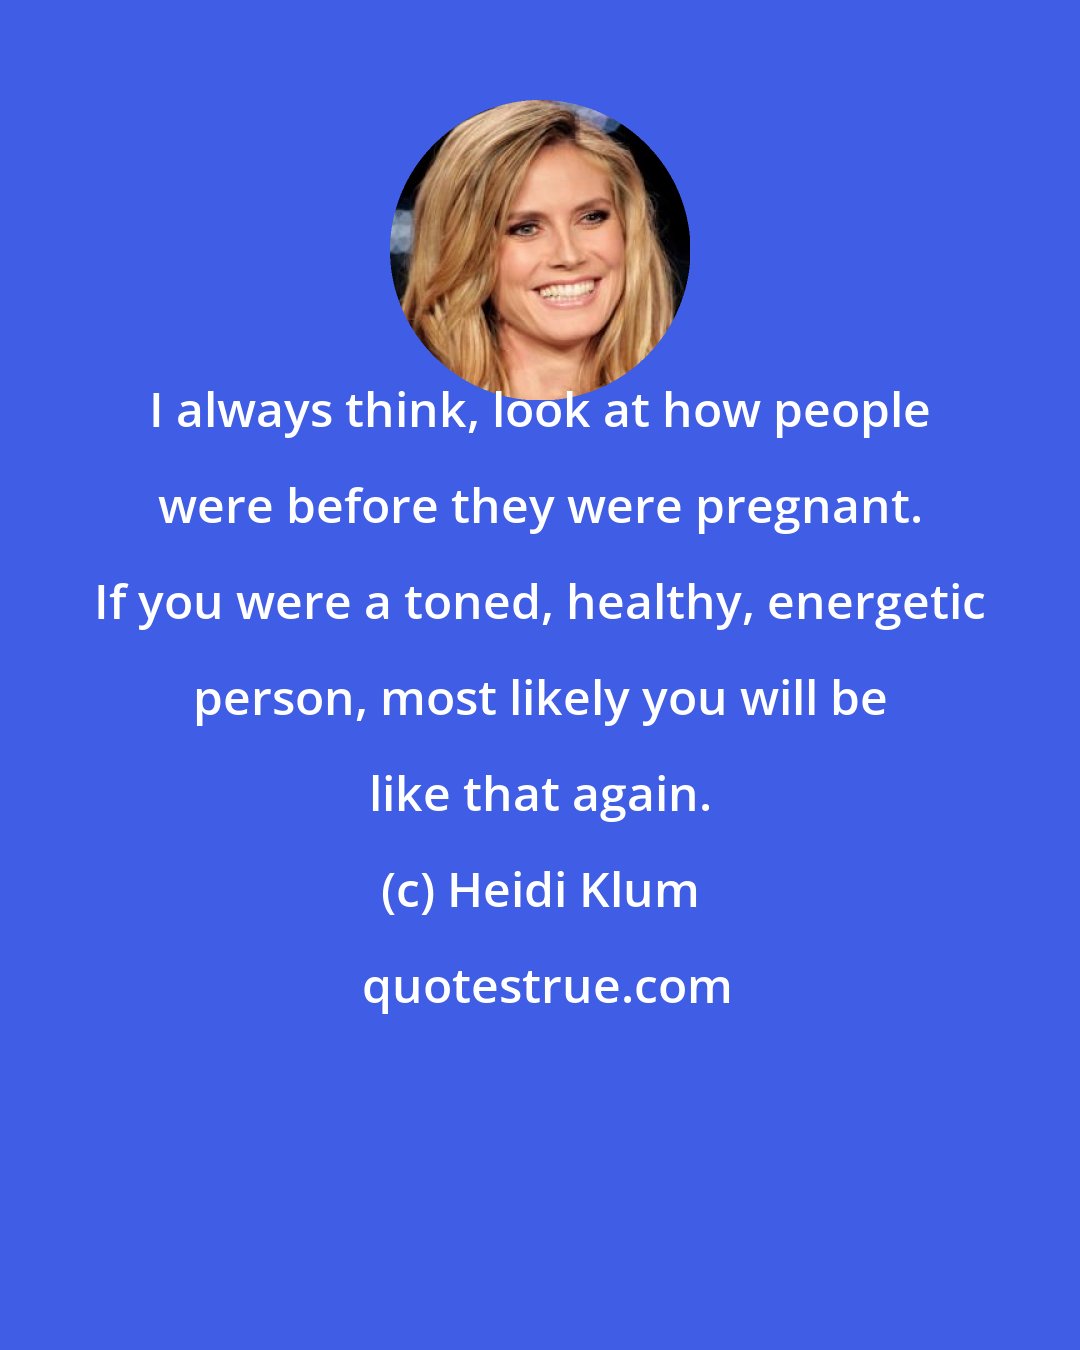 Heidi Klum: I always think, look at how people were before they were pregnant. If you were a toned, healthy, energetic person, most likely you will be like that again.